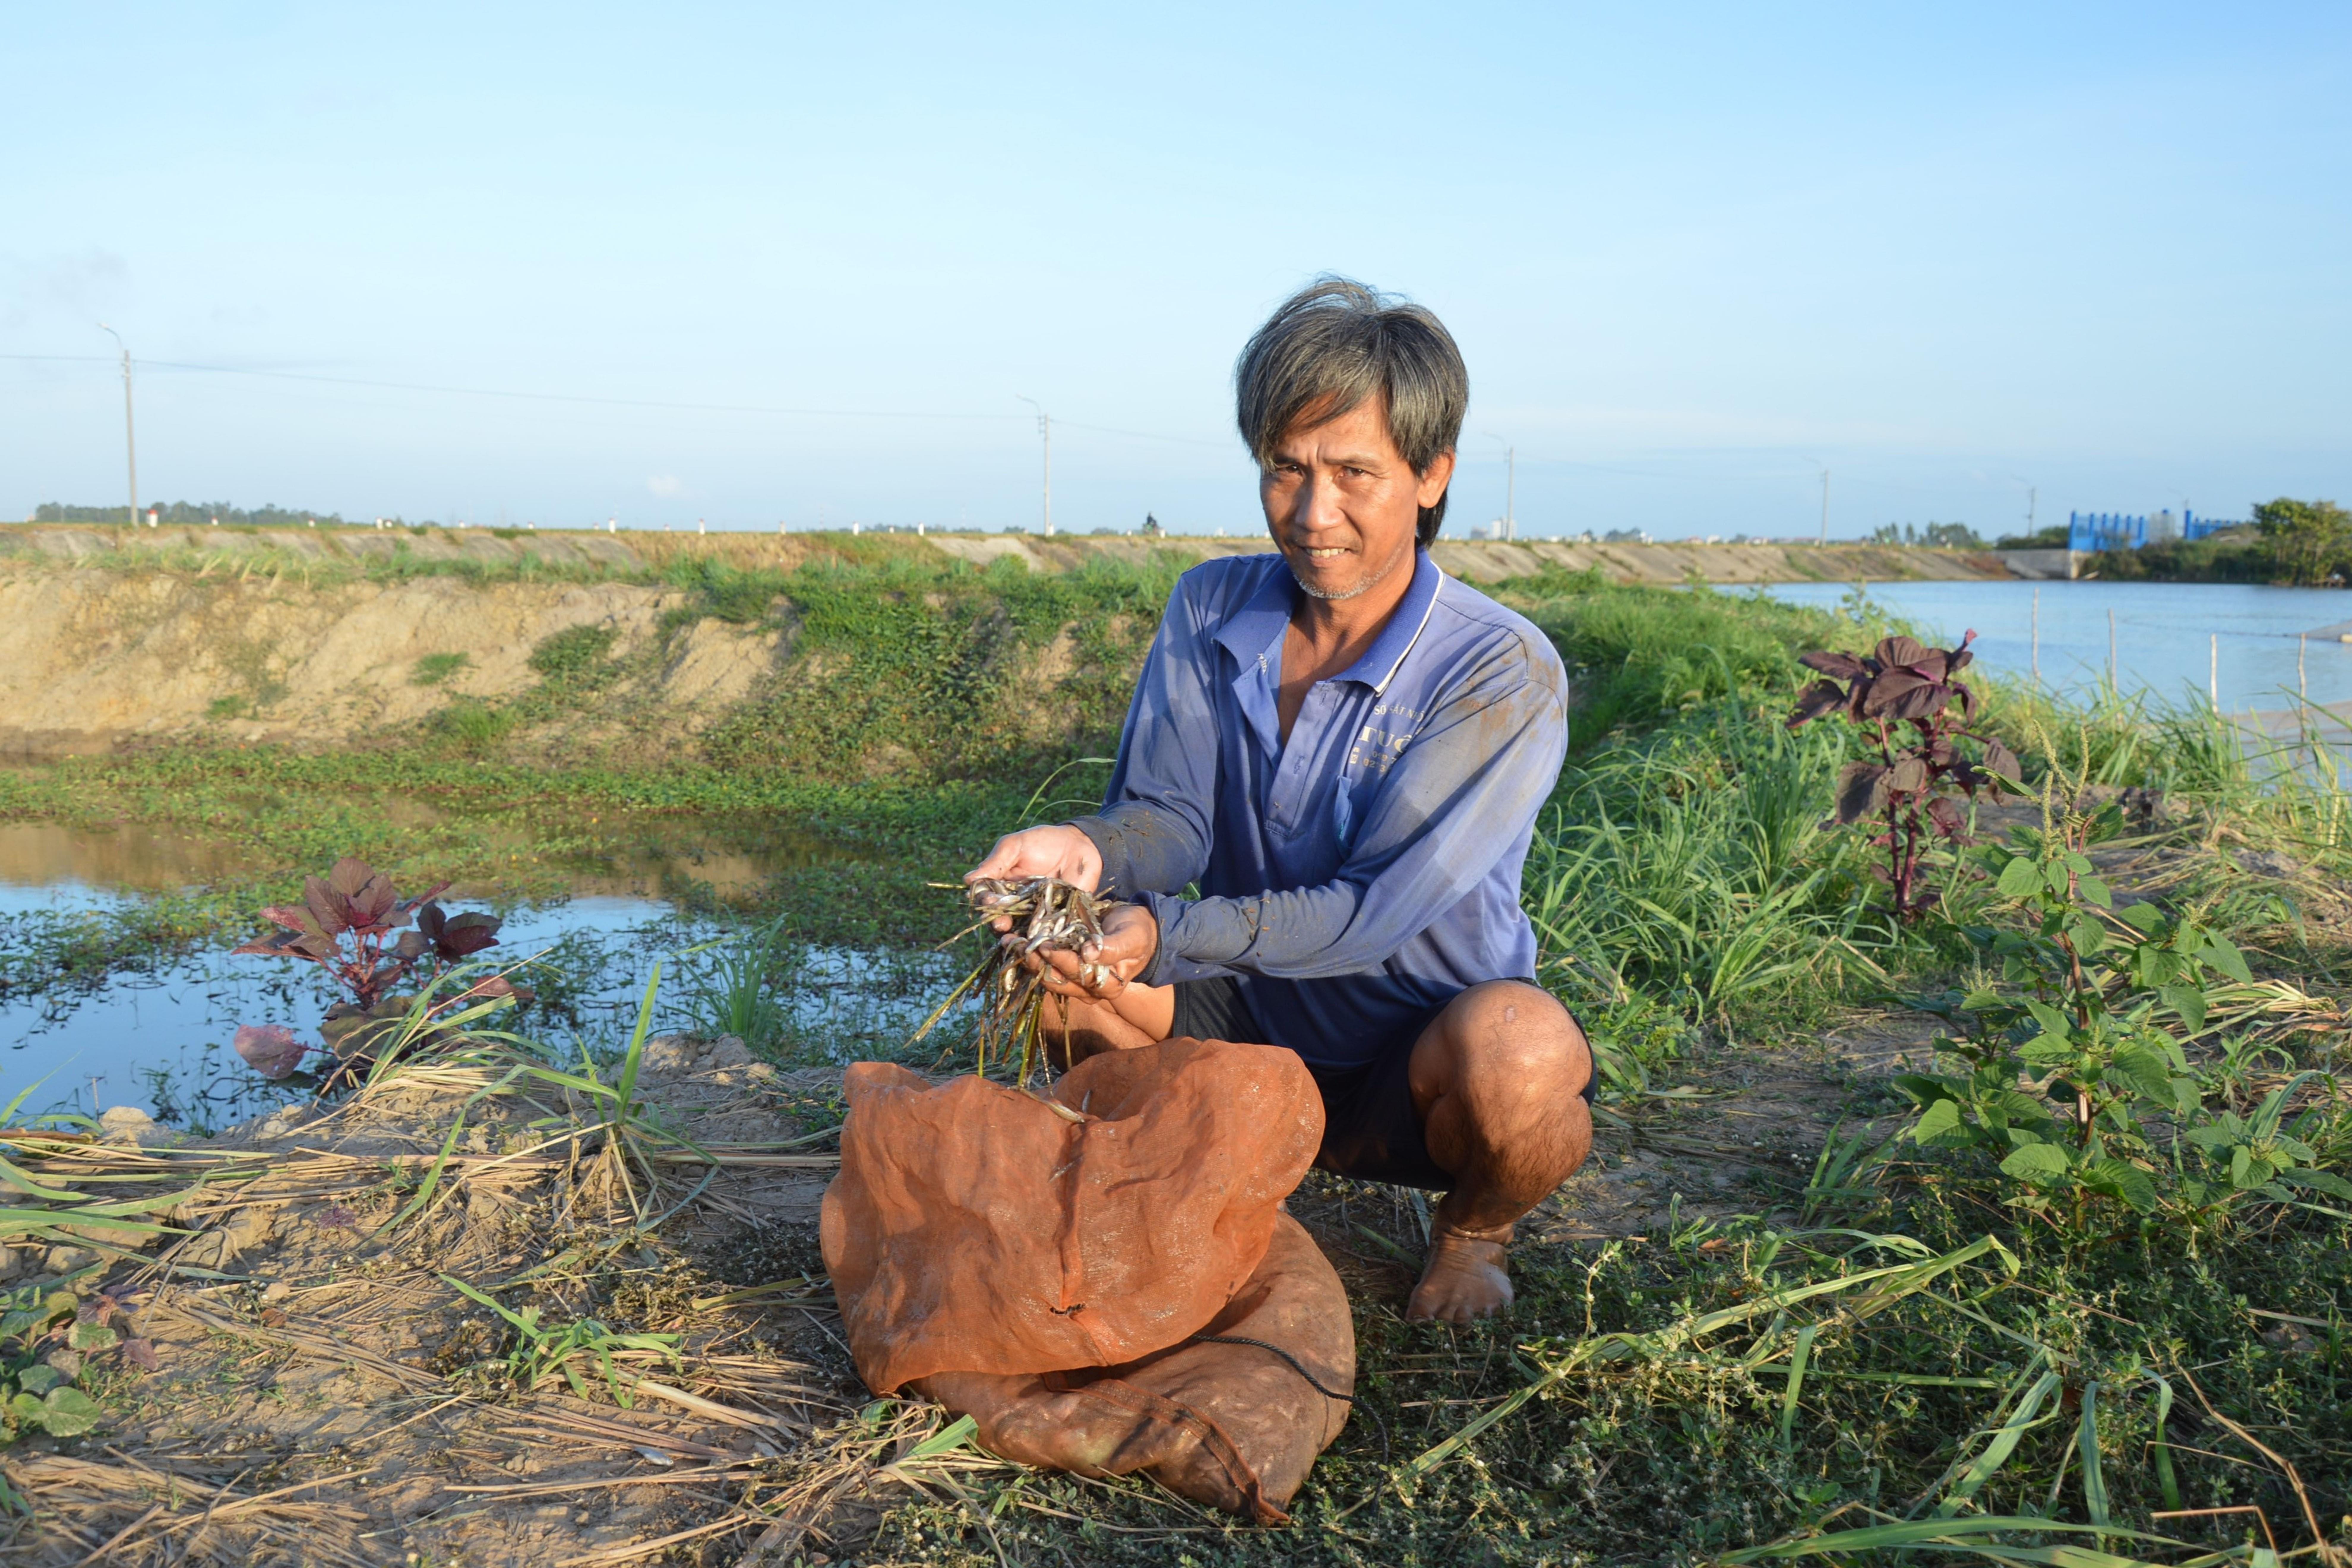 Fish catches in the Mekong Delta are in decline due to the climate change, hydropower dams in upstream Mekong River and dyke systems in high yield rice farms.